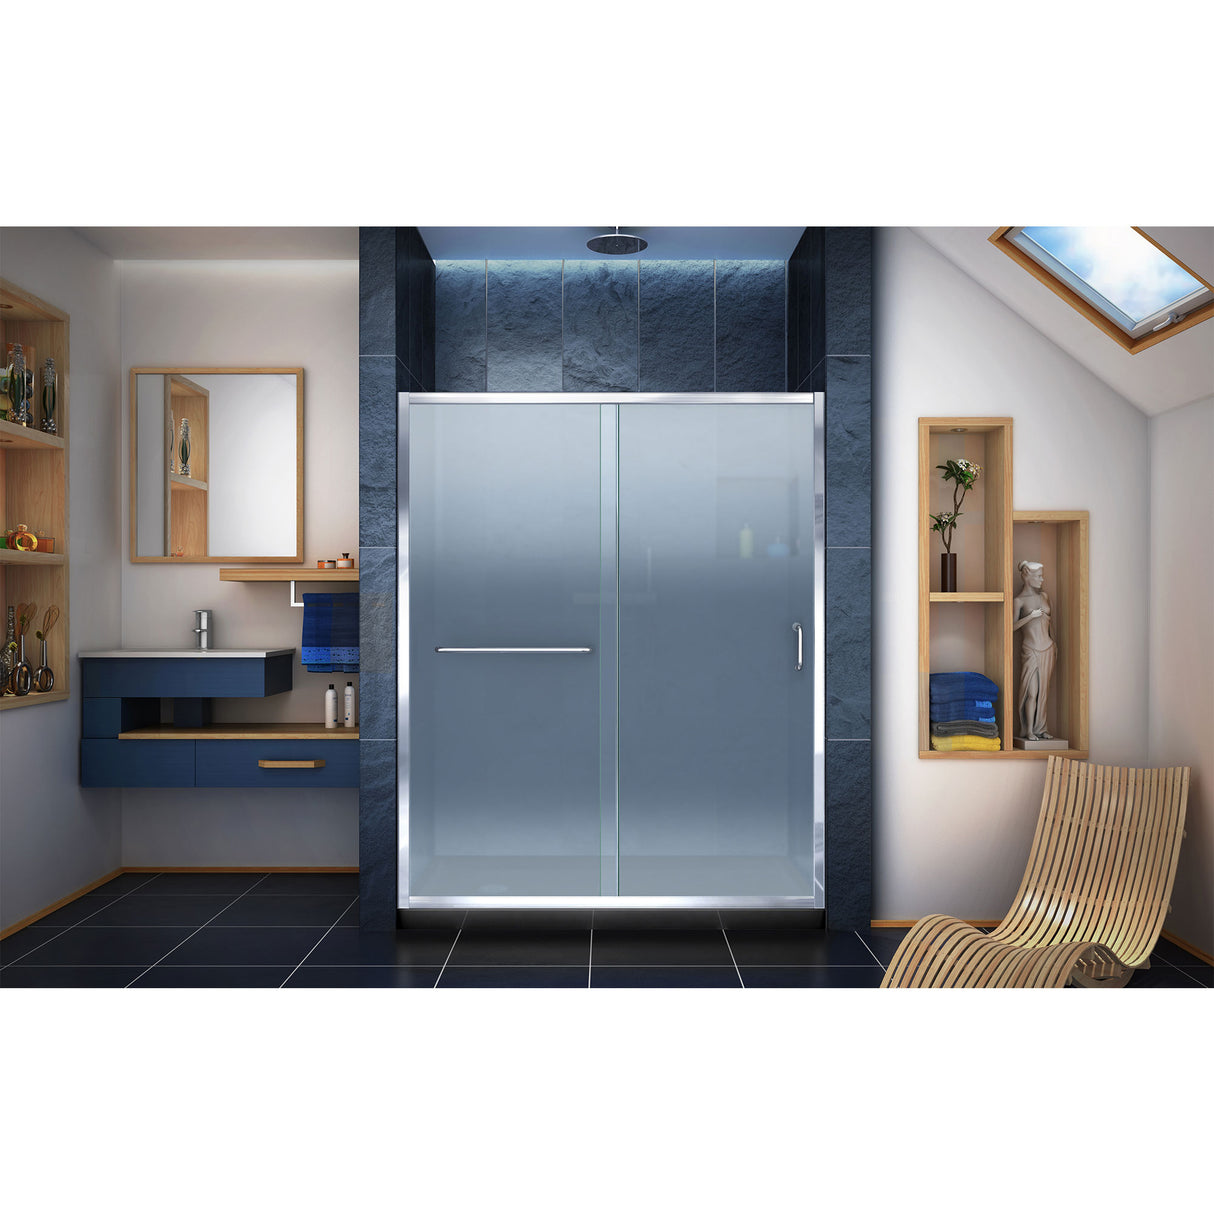 DreamLine Infinity-Z 34 in. D x 60 in. W x 74 3/4 in. H Frosted Sliding Shower Door in Chrome and Left Drain Black Base